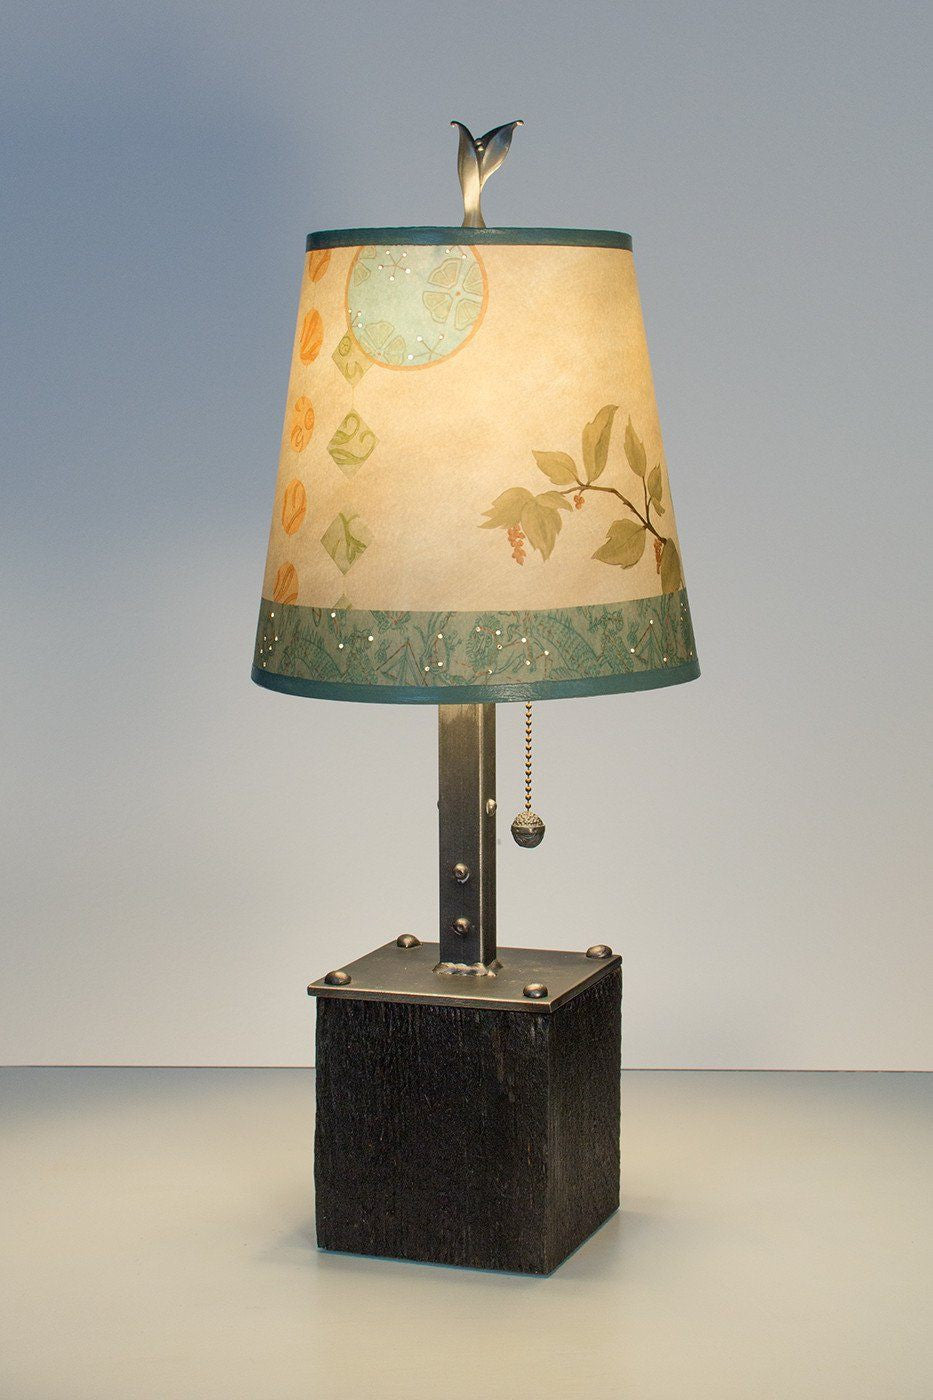 Steel Table Lamp on Reclaimed Wood with Small Drum Shade in Celestial Leaf Lit